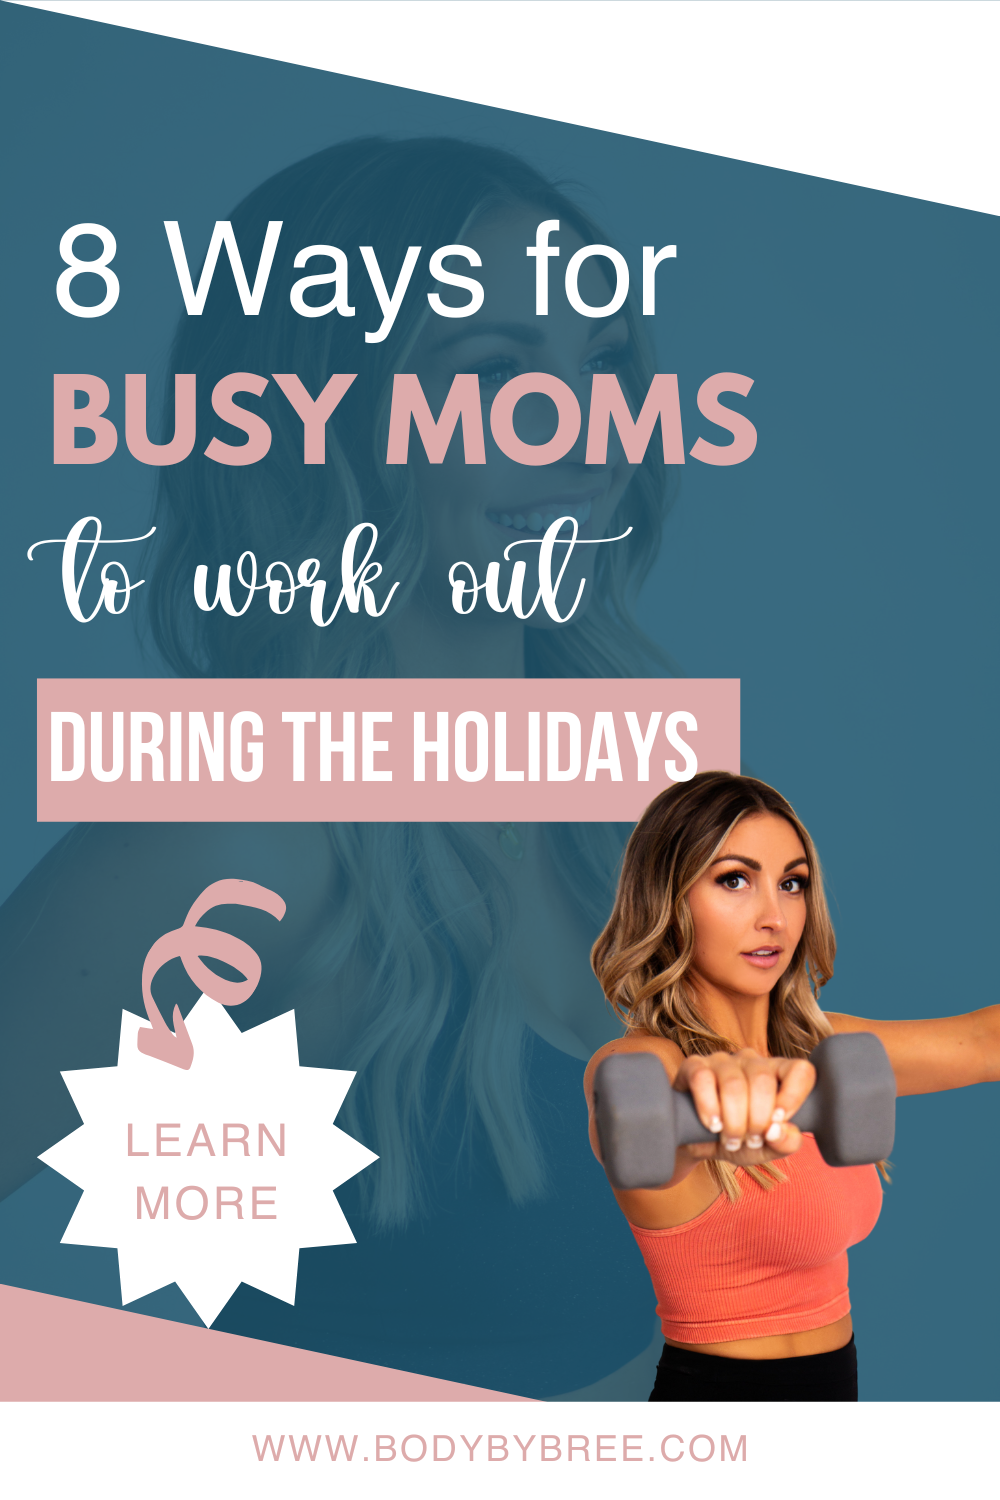 8 WAYS FOR BUSY MOMS TO WORK OUT DURING THE HOLIDAYS